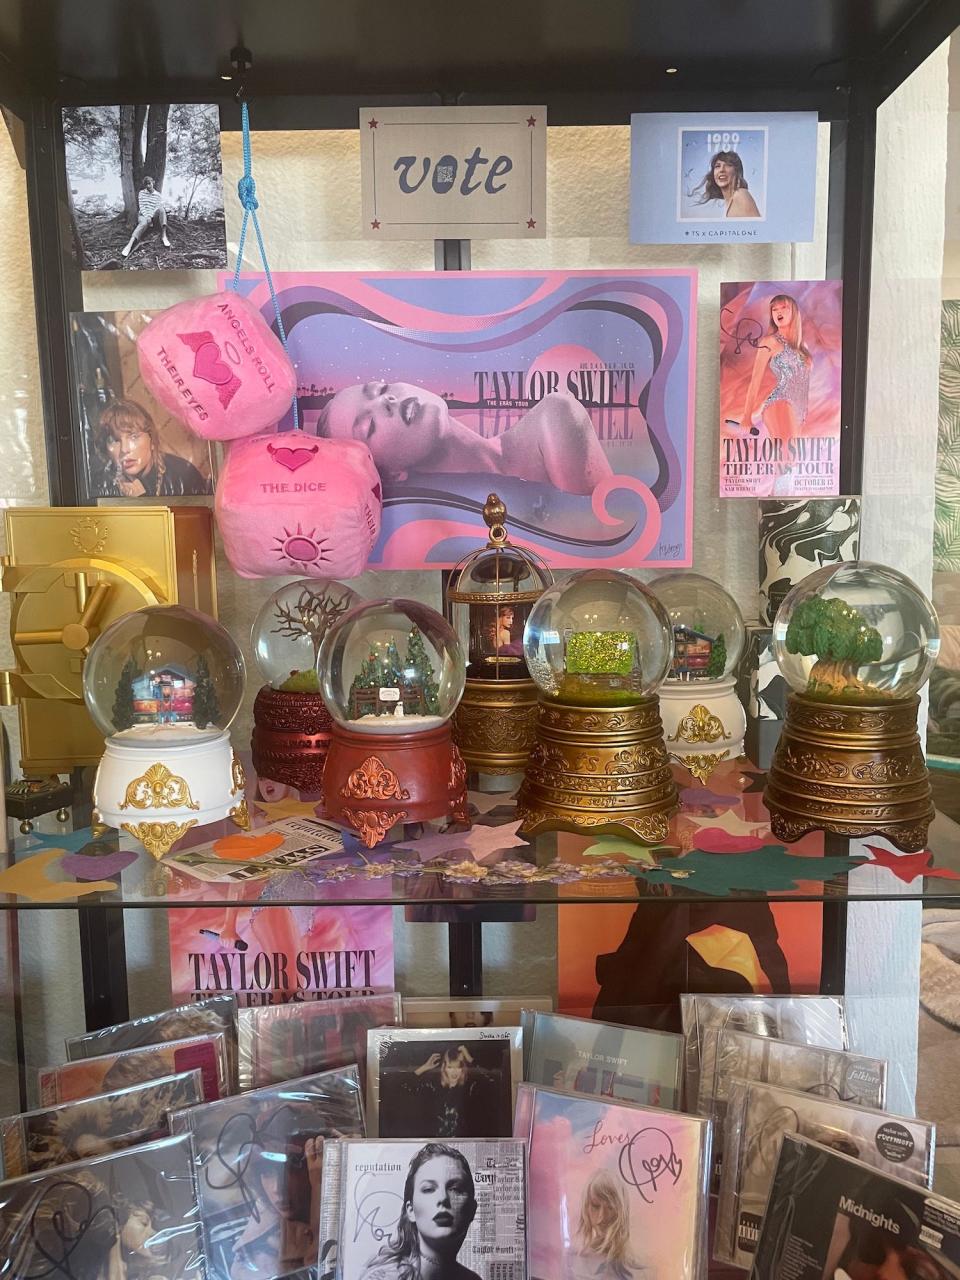 Madeline Cooperman's collection of Taylor Swift snow globes.